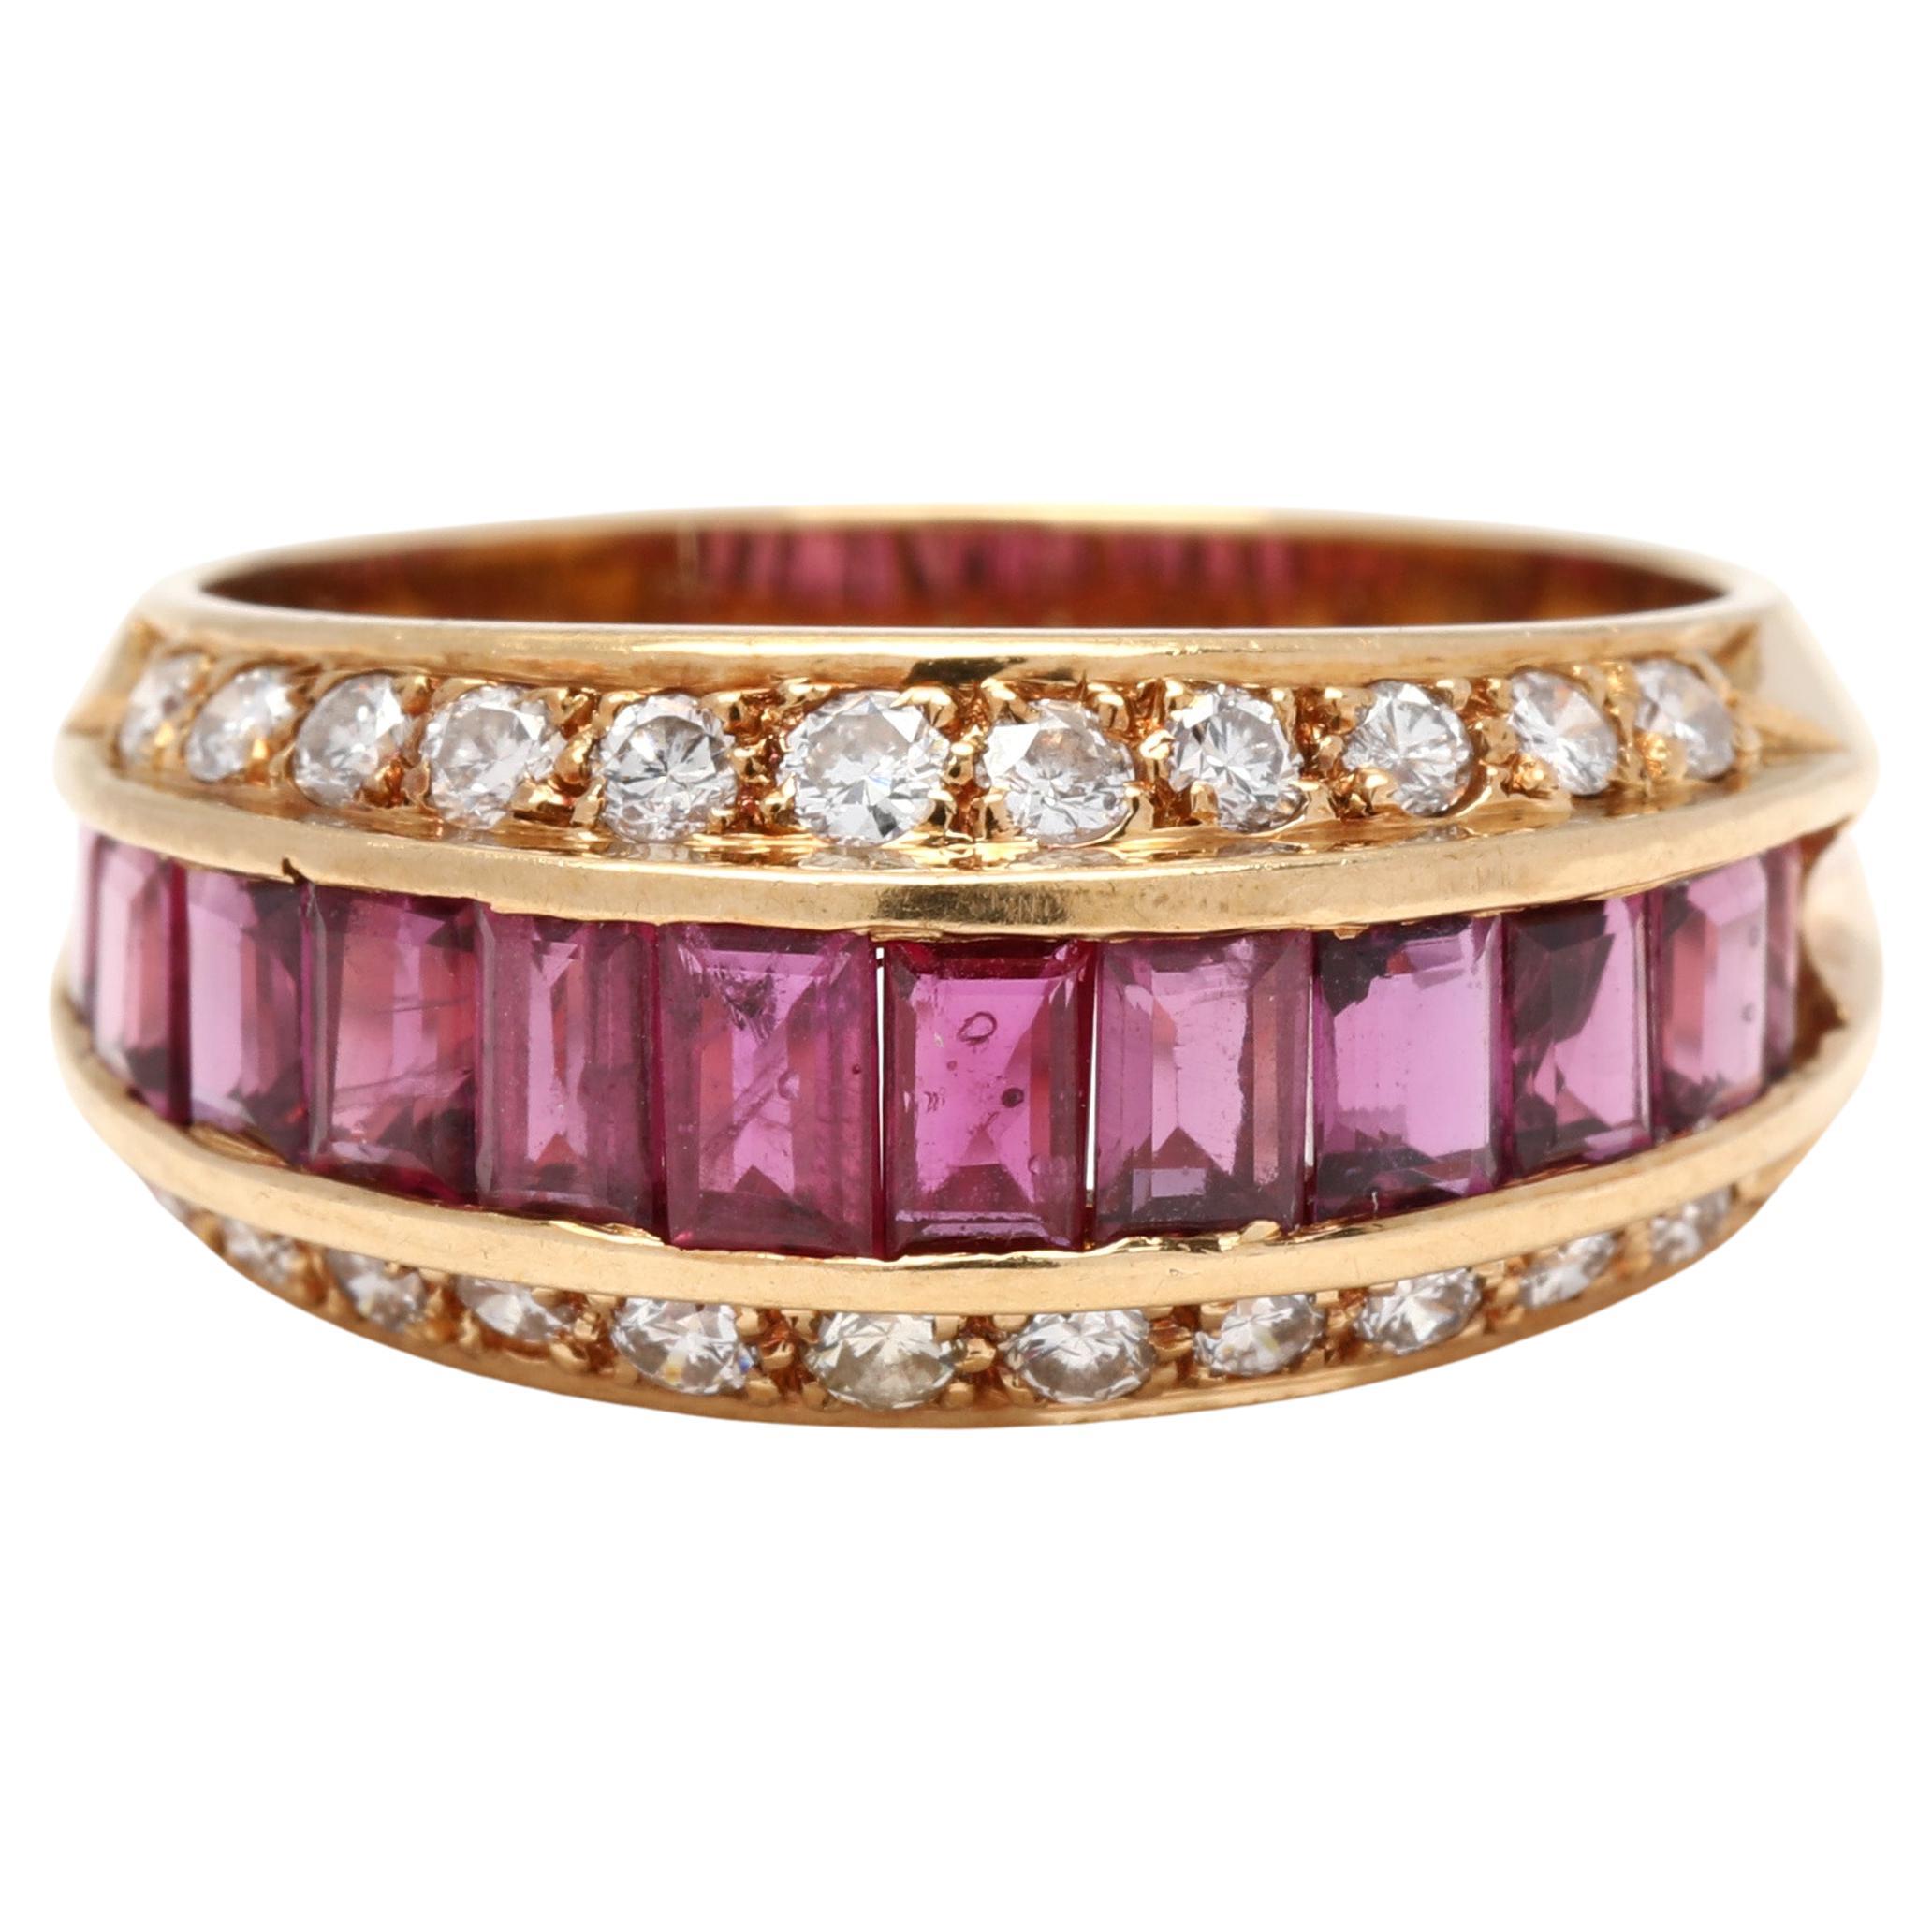 1.75ctw Diamond and Ruby Band Ring, 18k Yellow Gold, Ring Size 6.25, Baguette For Sale